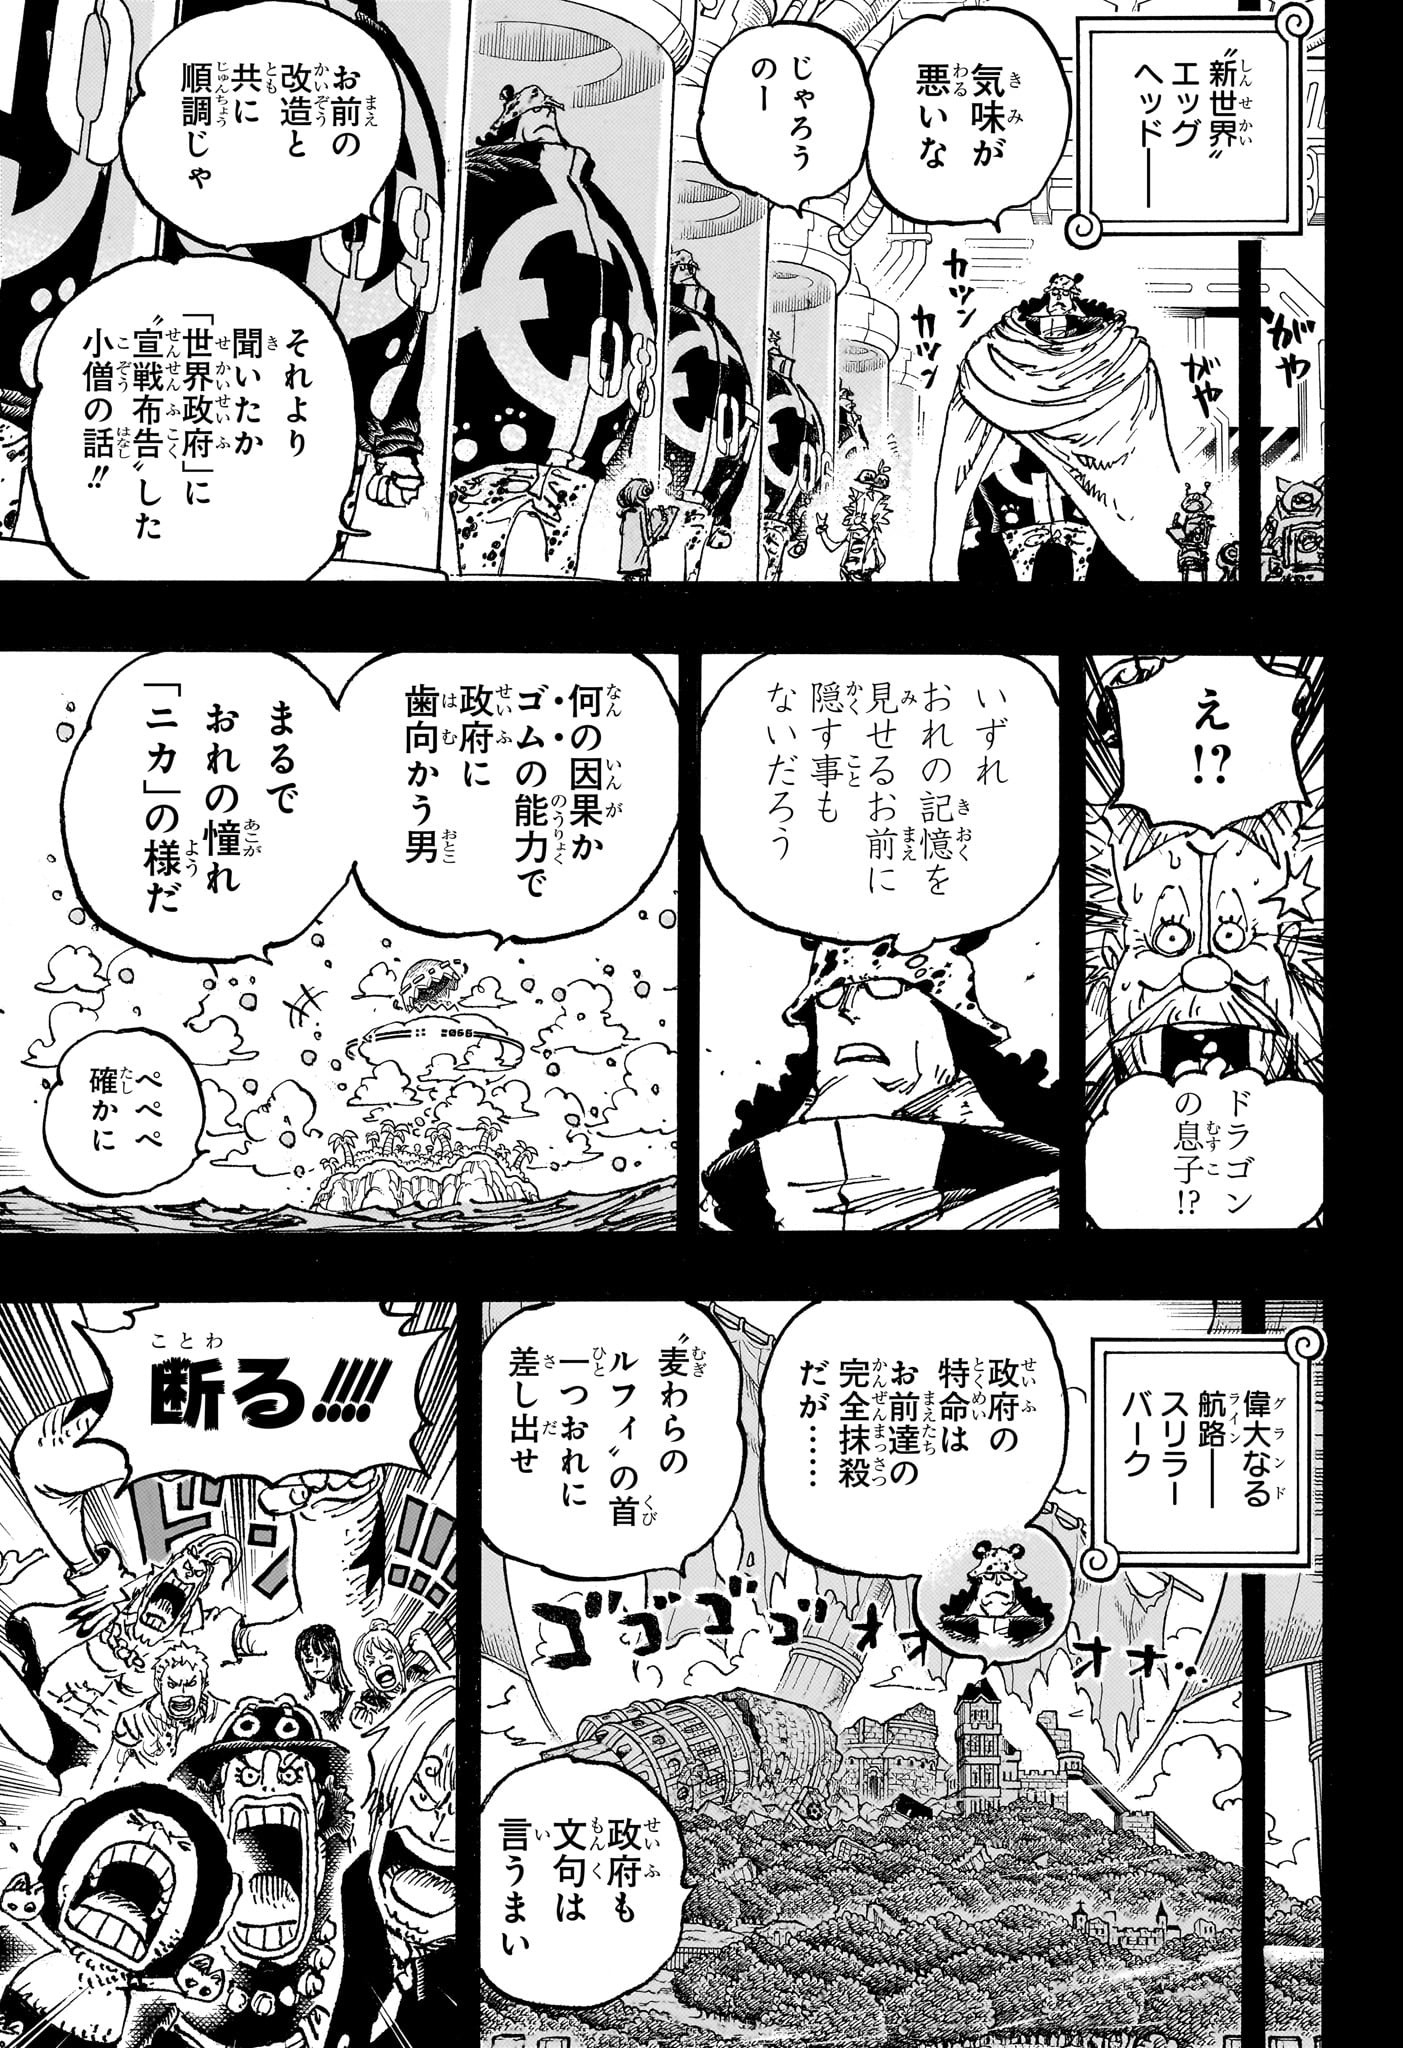 One Piece - Chapter 1102 - Page 5